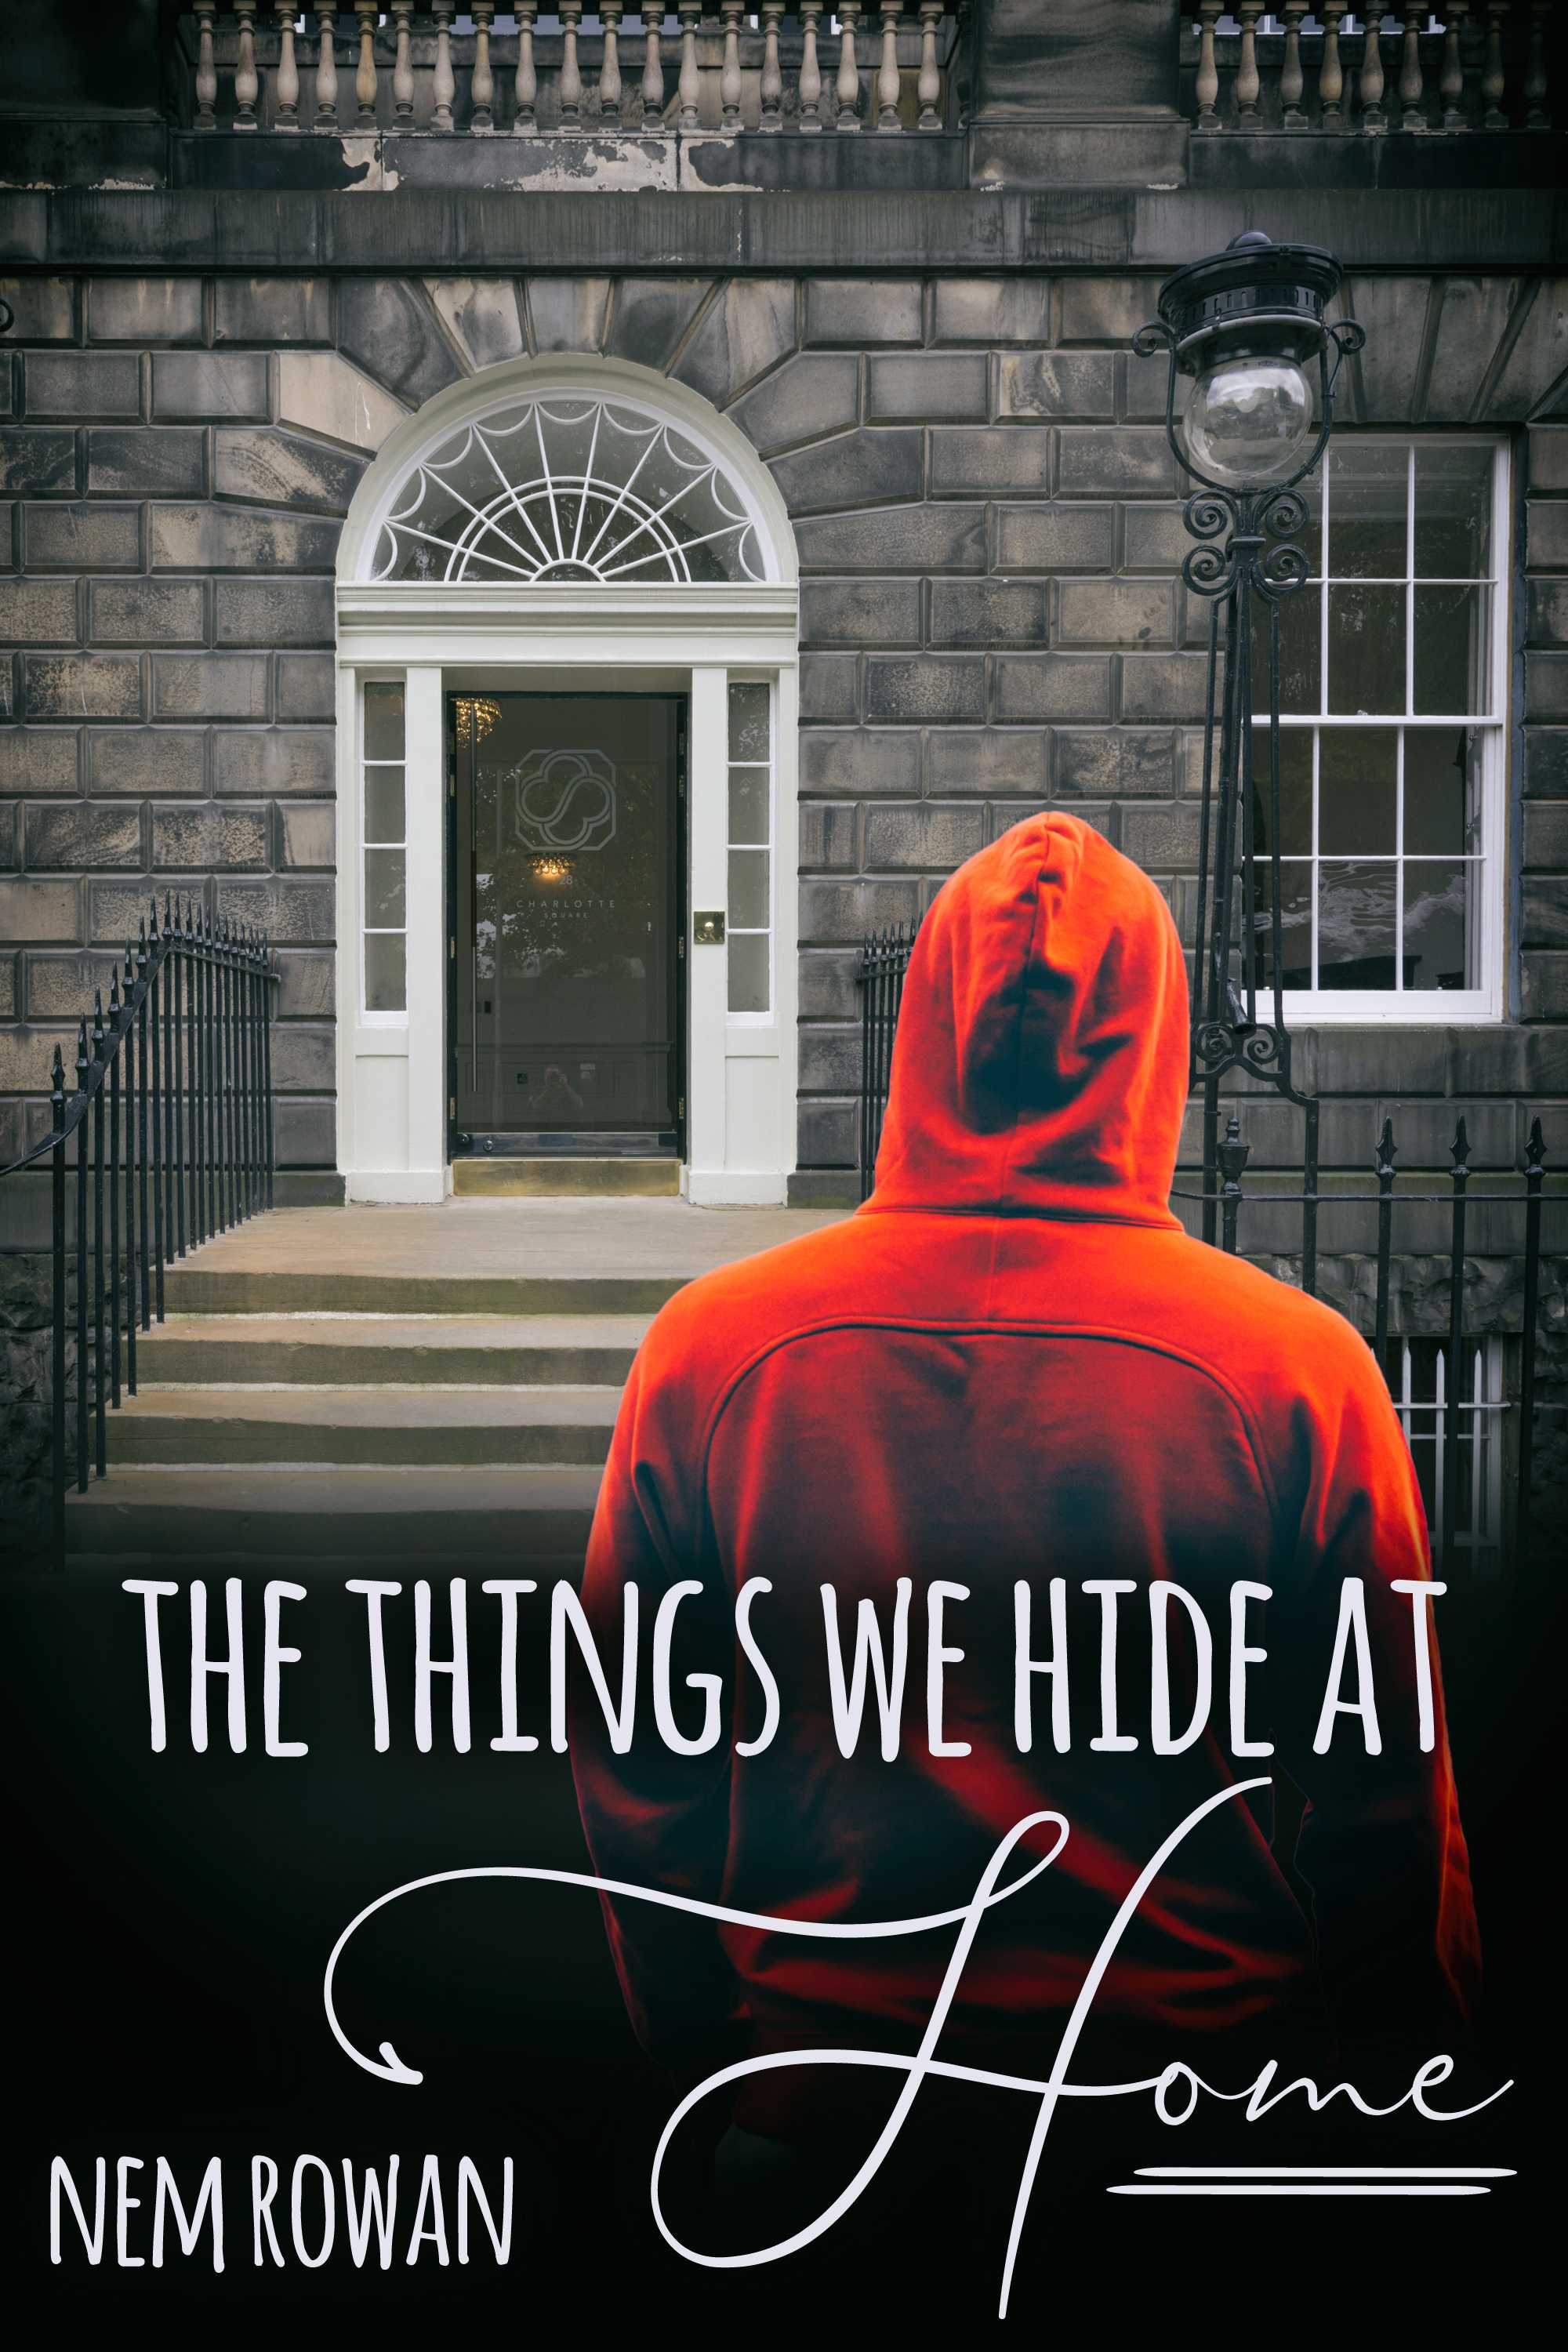 This image is the cover for the book The Things We Hide at Home